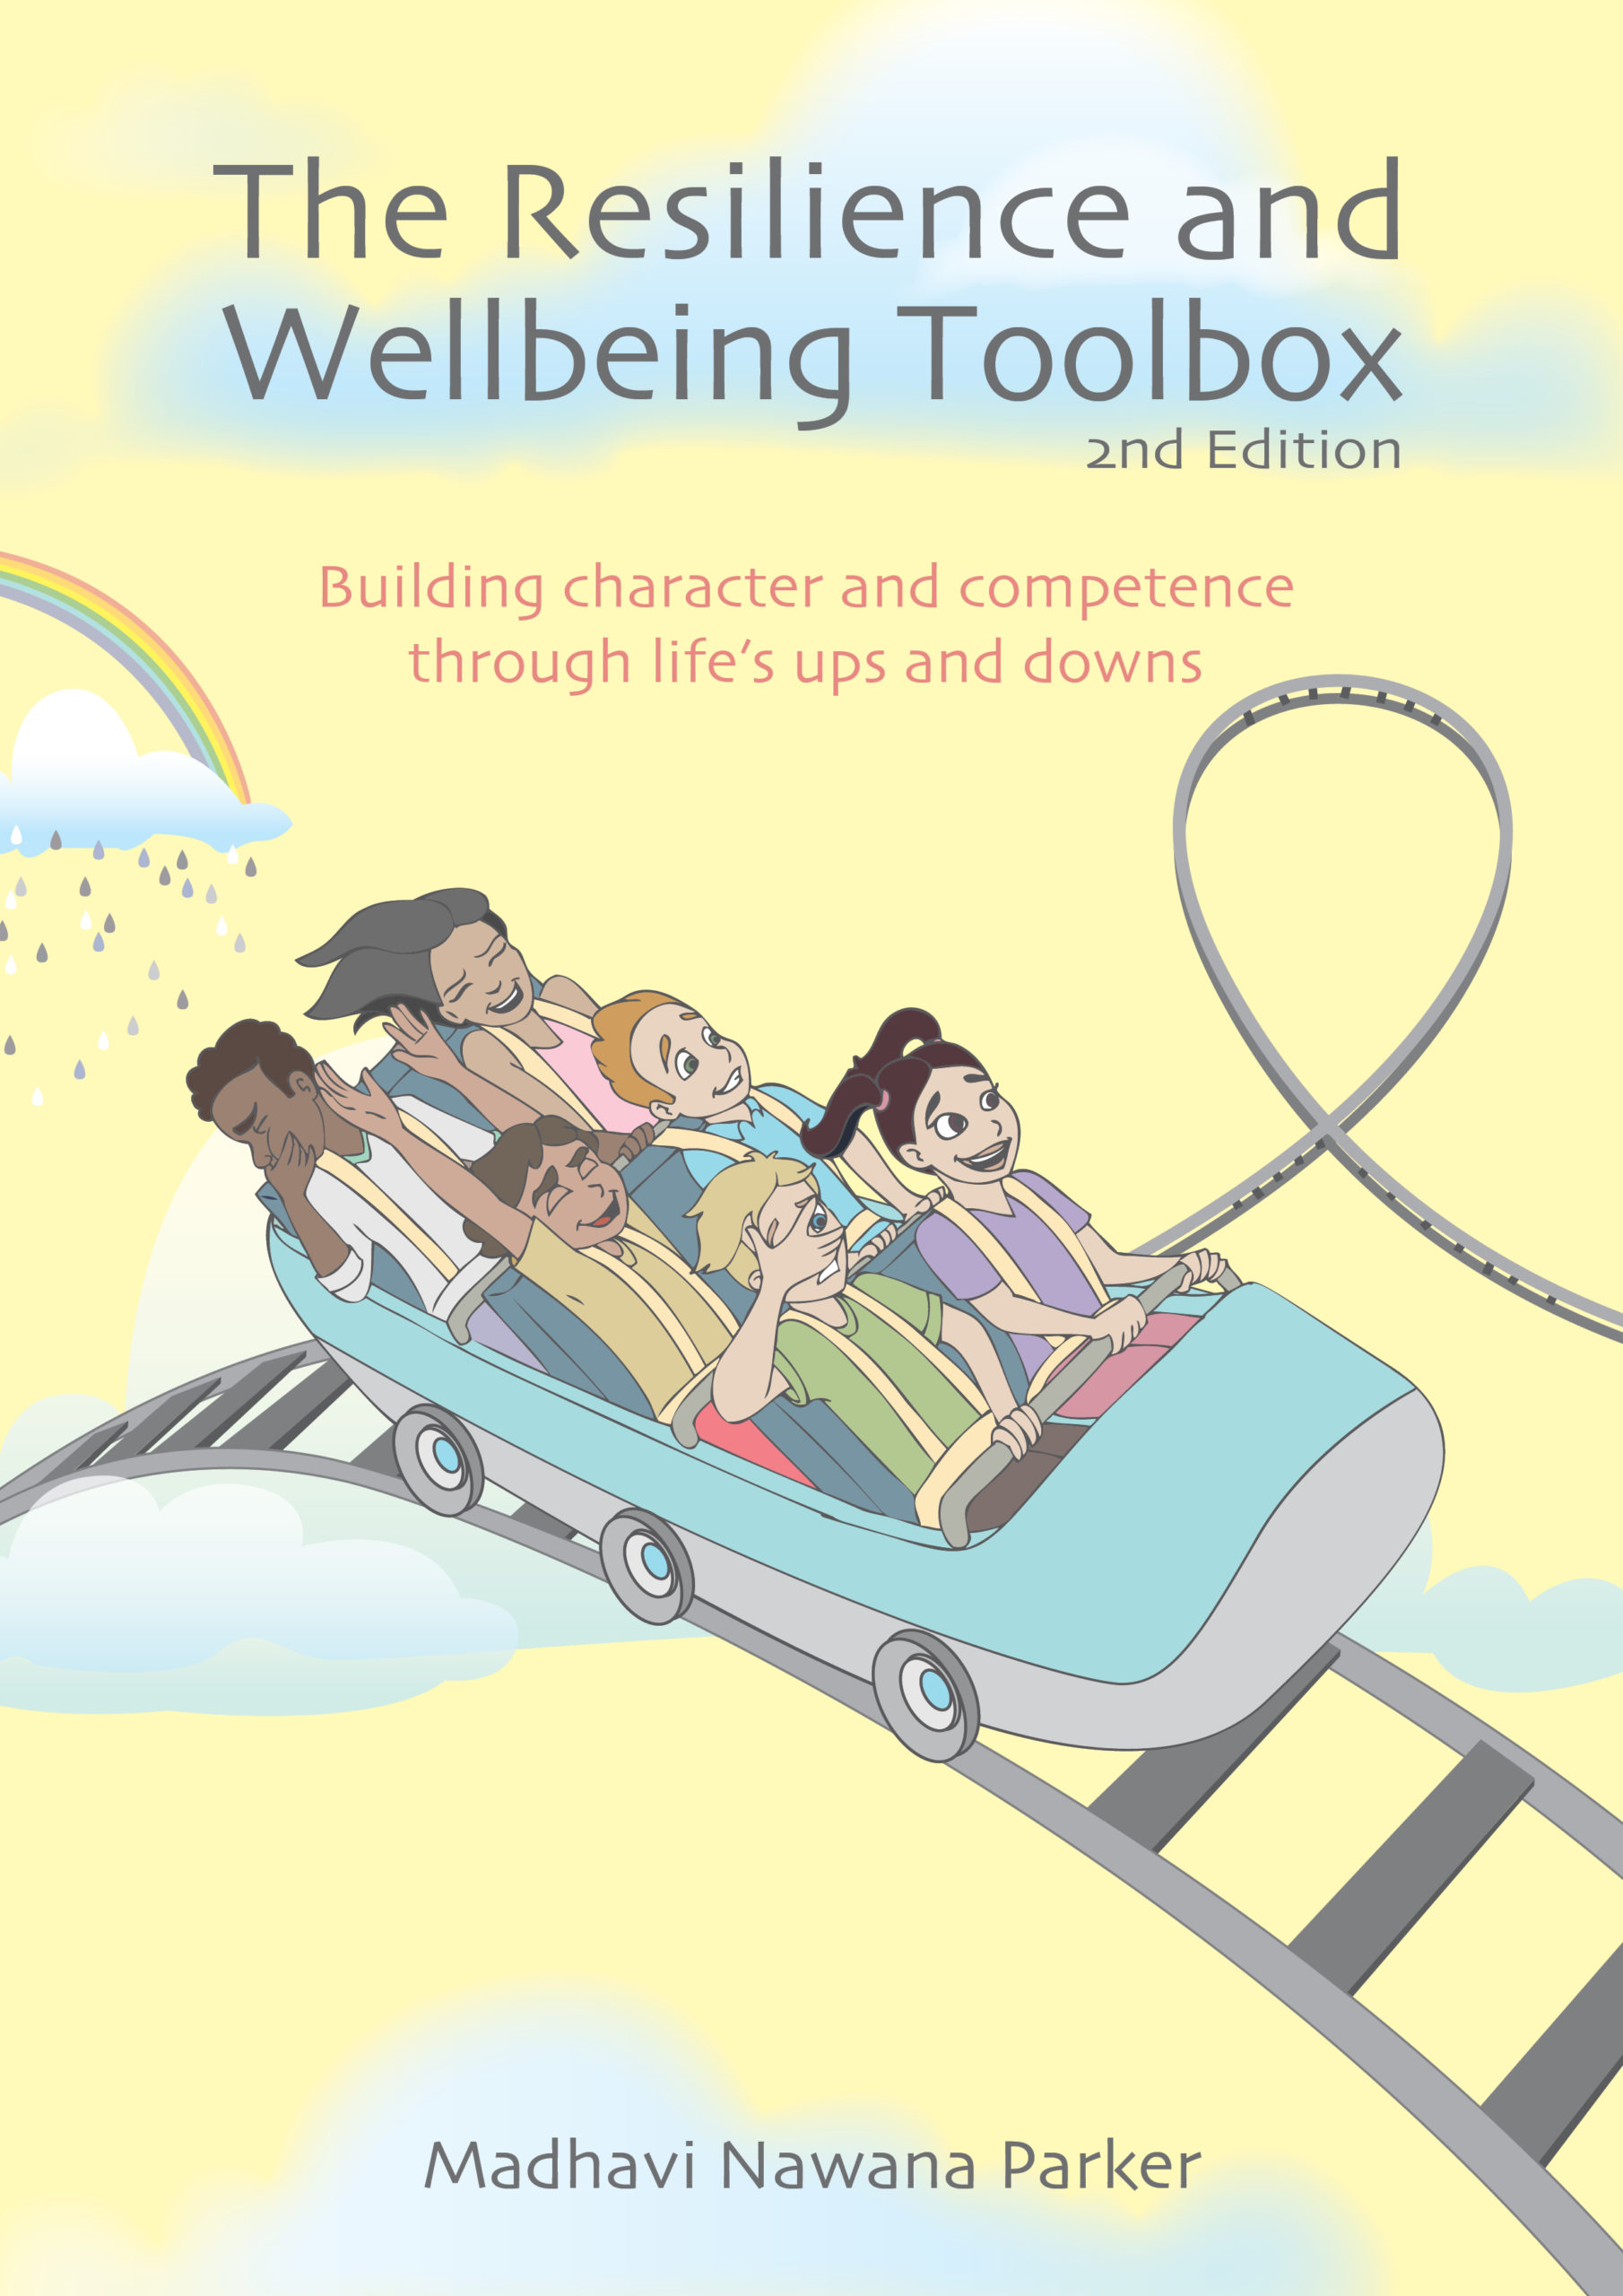 The Resilience and Wellbeing Toolbox book cover: three children with a toolbox 2nd Edition